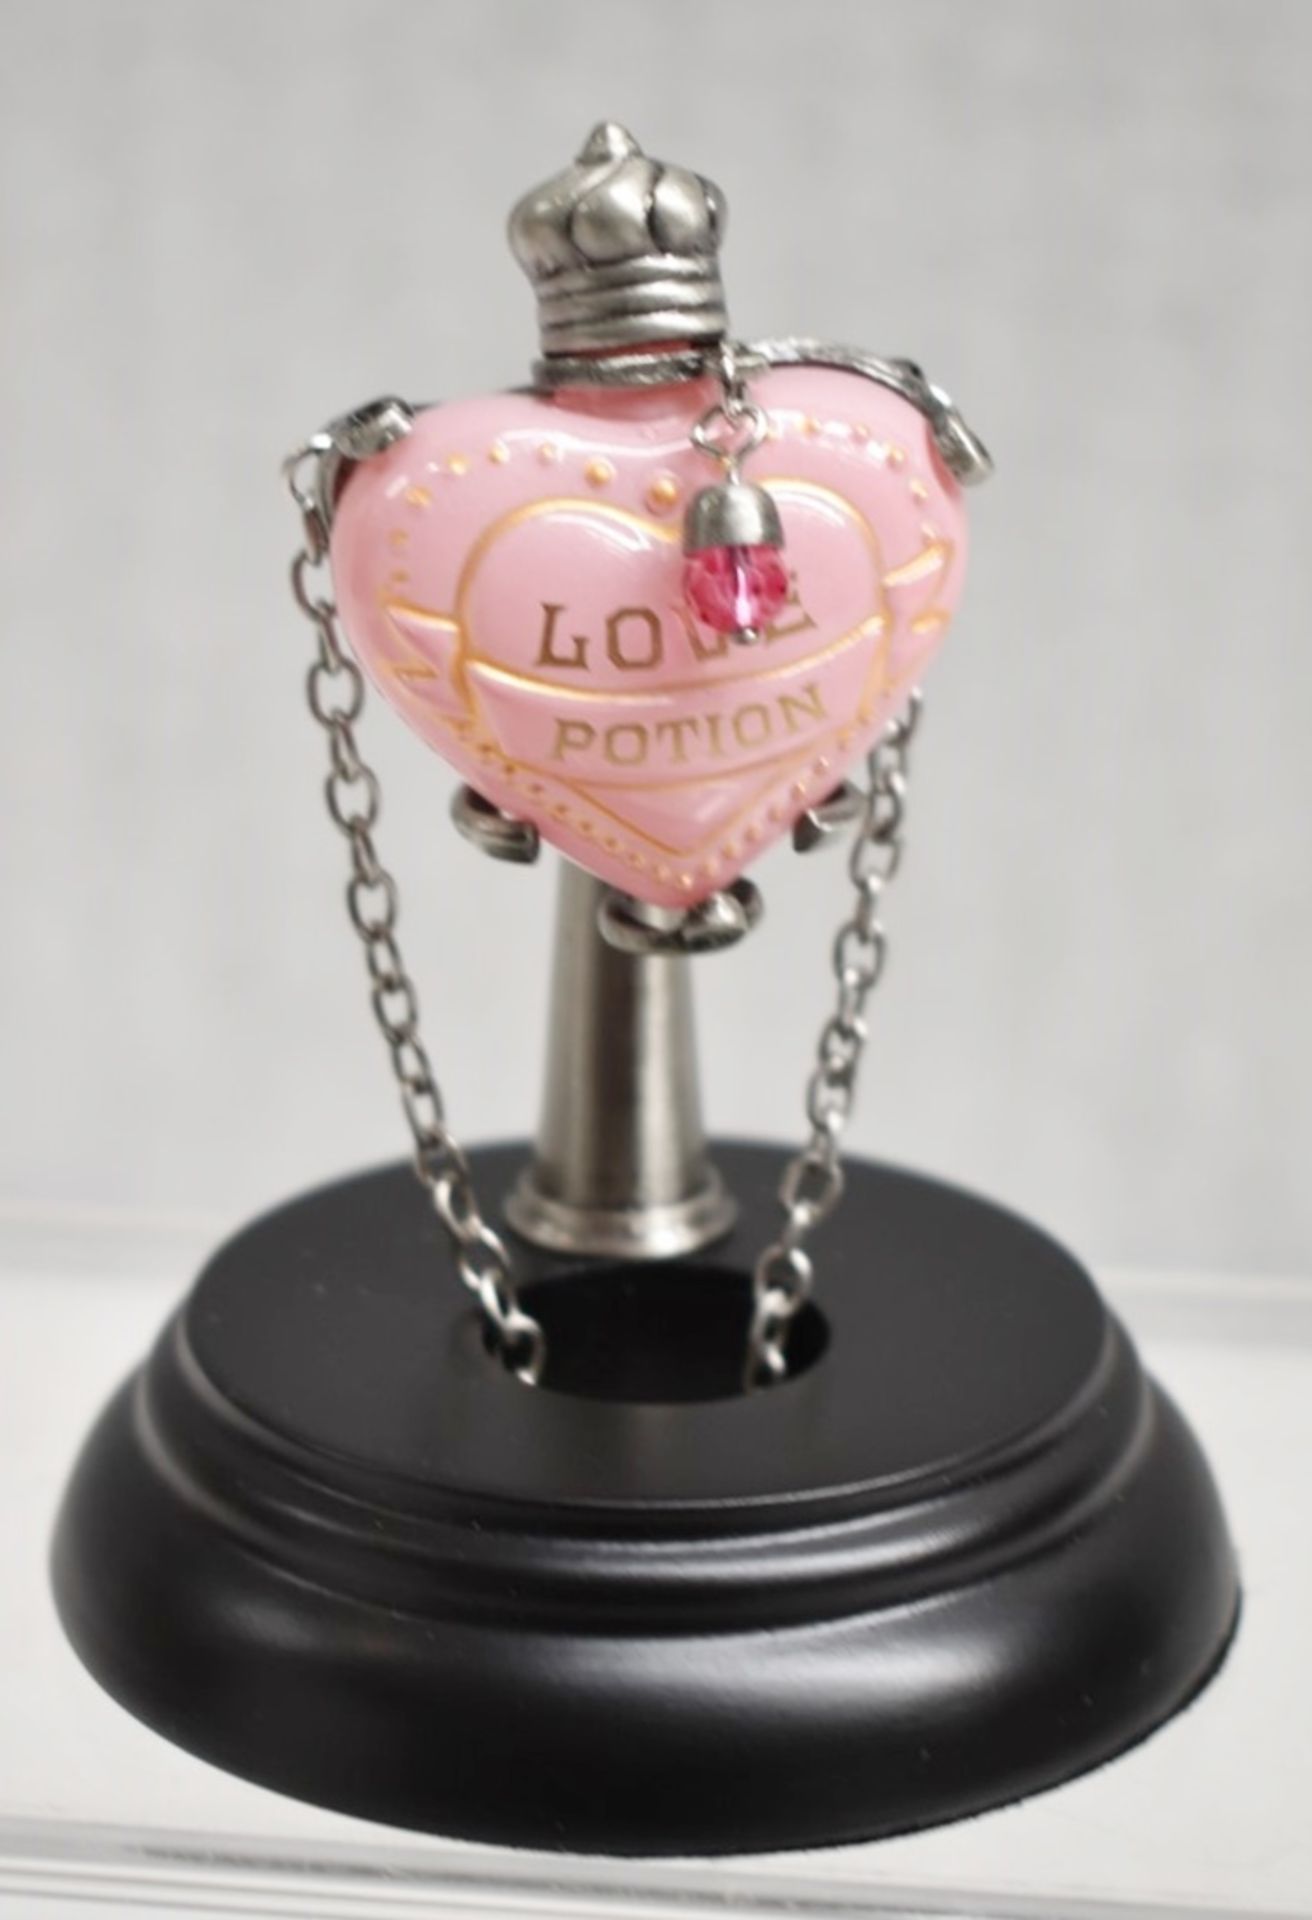 1 x HARRY POTTER Glass 'Love Potion' Pendant With Metal Adorments - Original Price £49.95 - Unused - Image 6 of 9